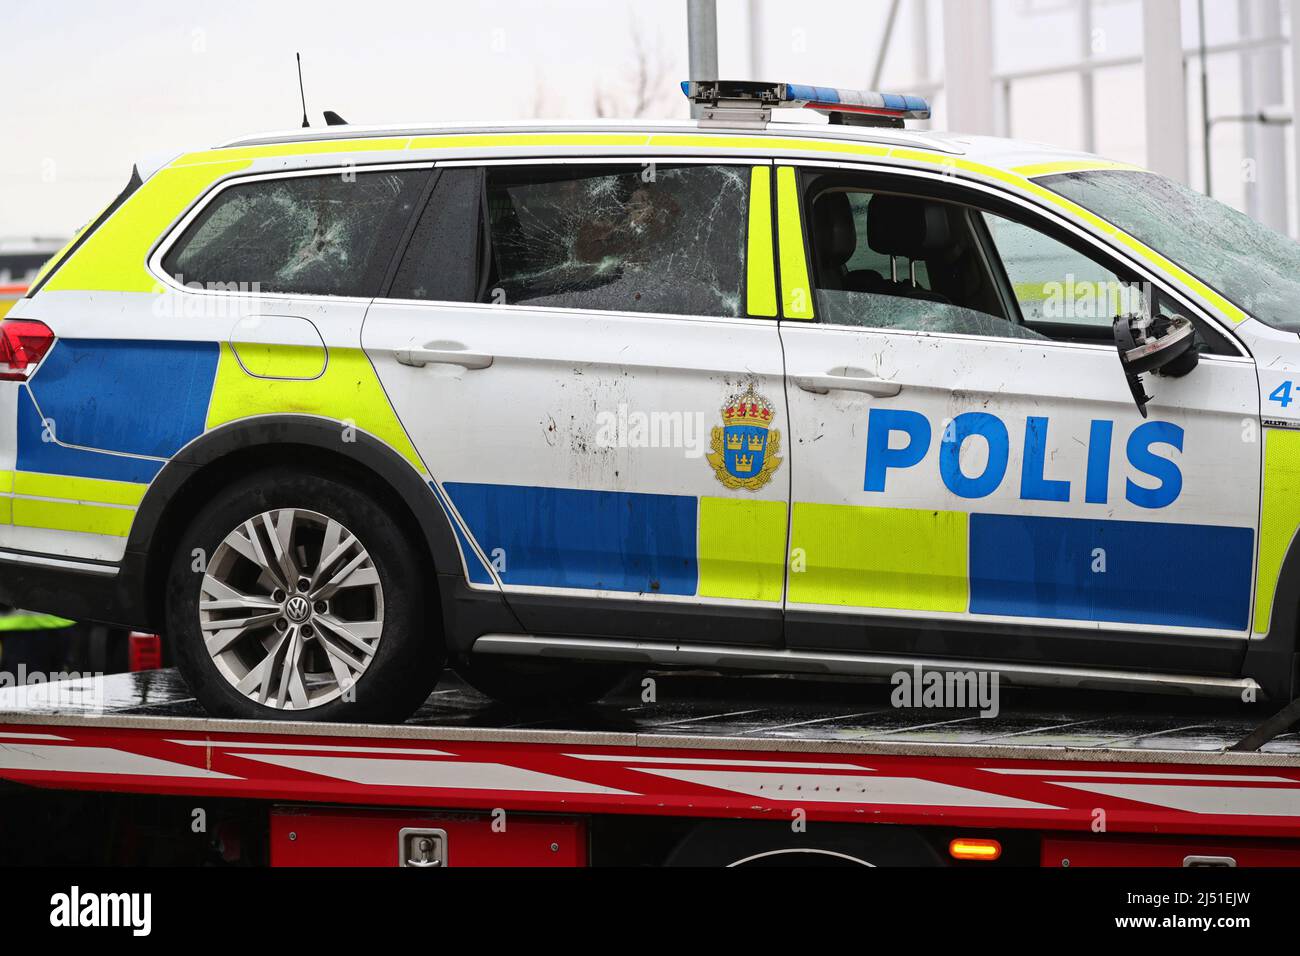 Three policemen were taken to hospital and two people have been arrested in connection with a violent riot in the Linköping district Skäggetorp, where the right-wing extremist Stram kurs (In english: Stram course) had planned a demonstration. The picture shows police cars that were destroyed during the incident. Stock Photo